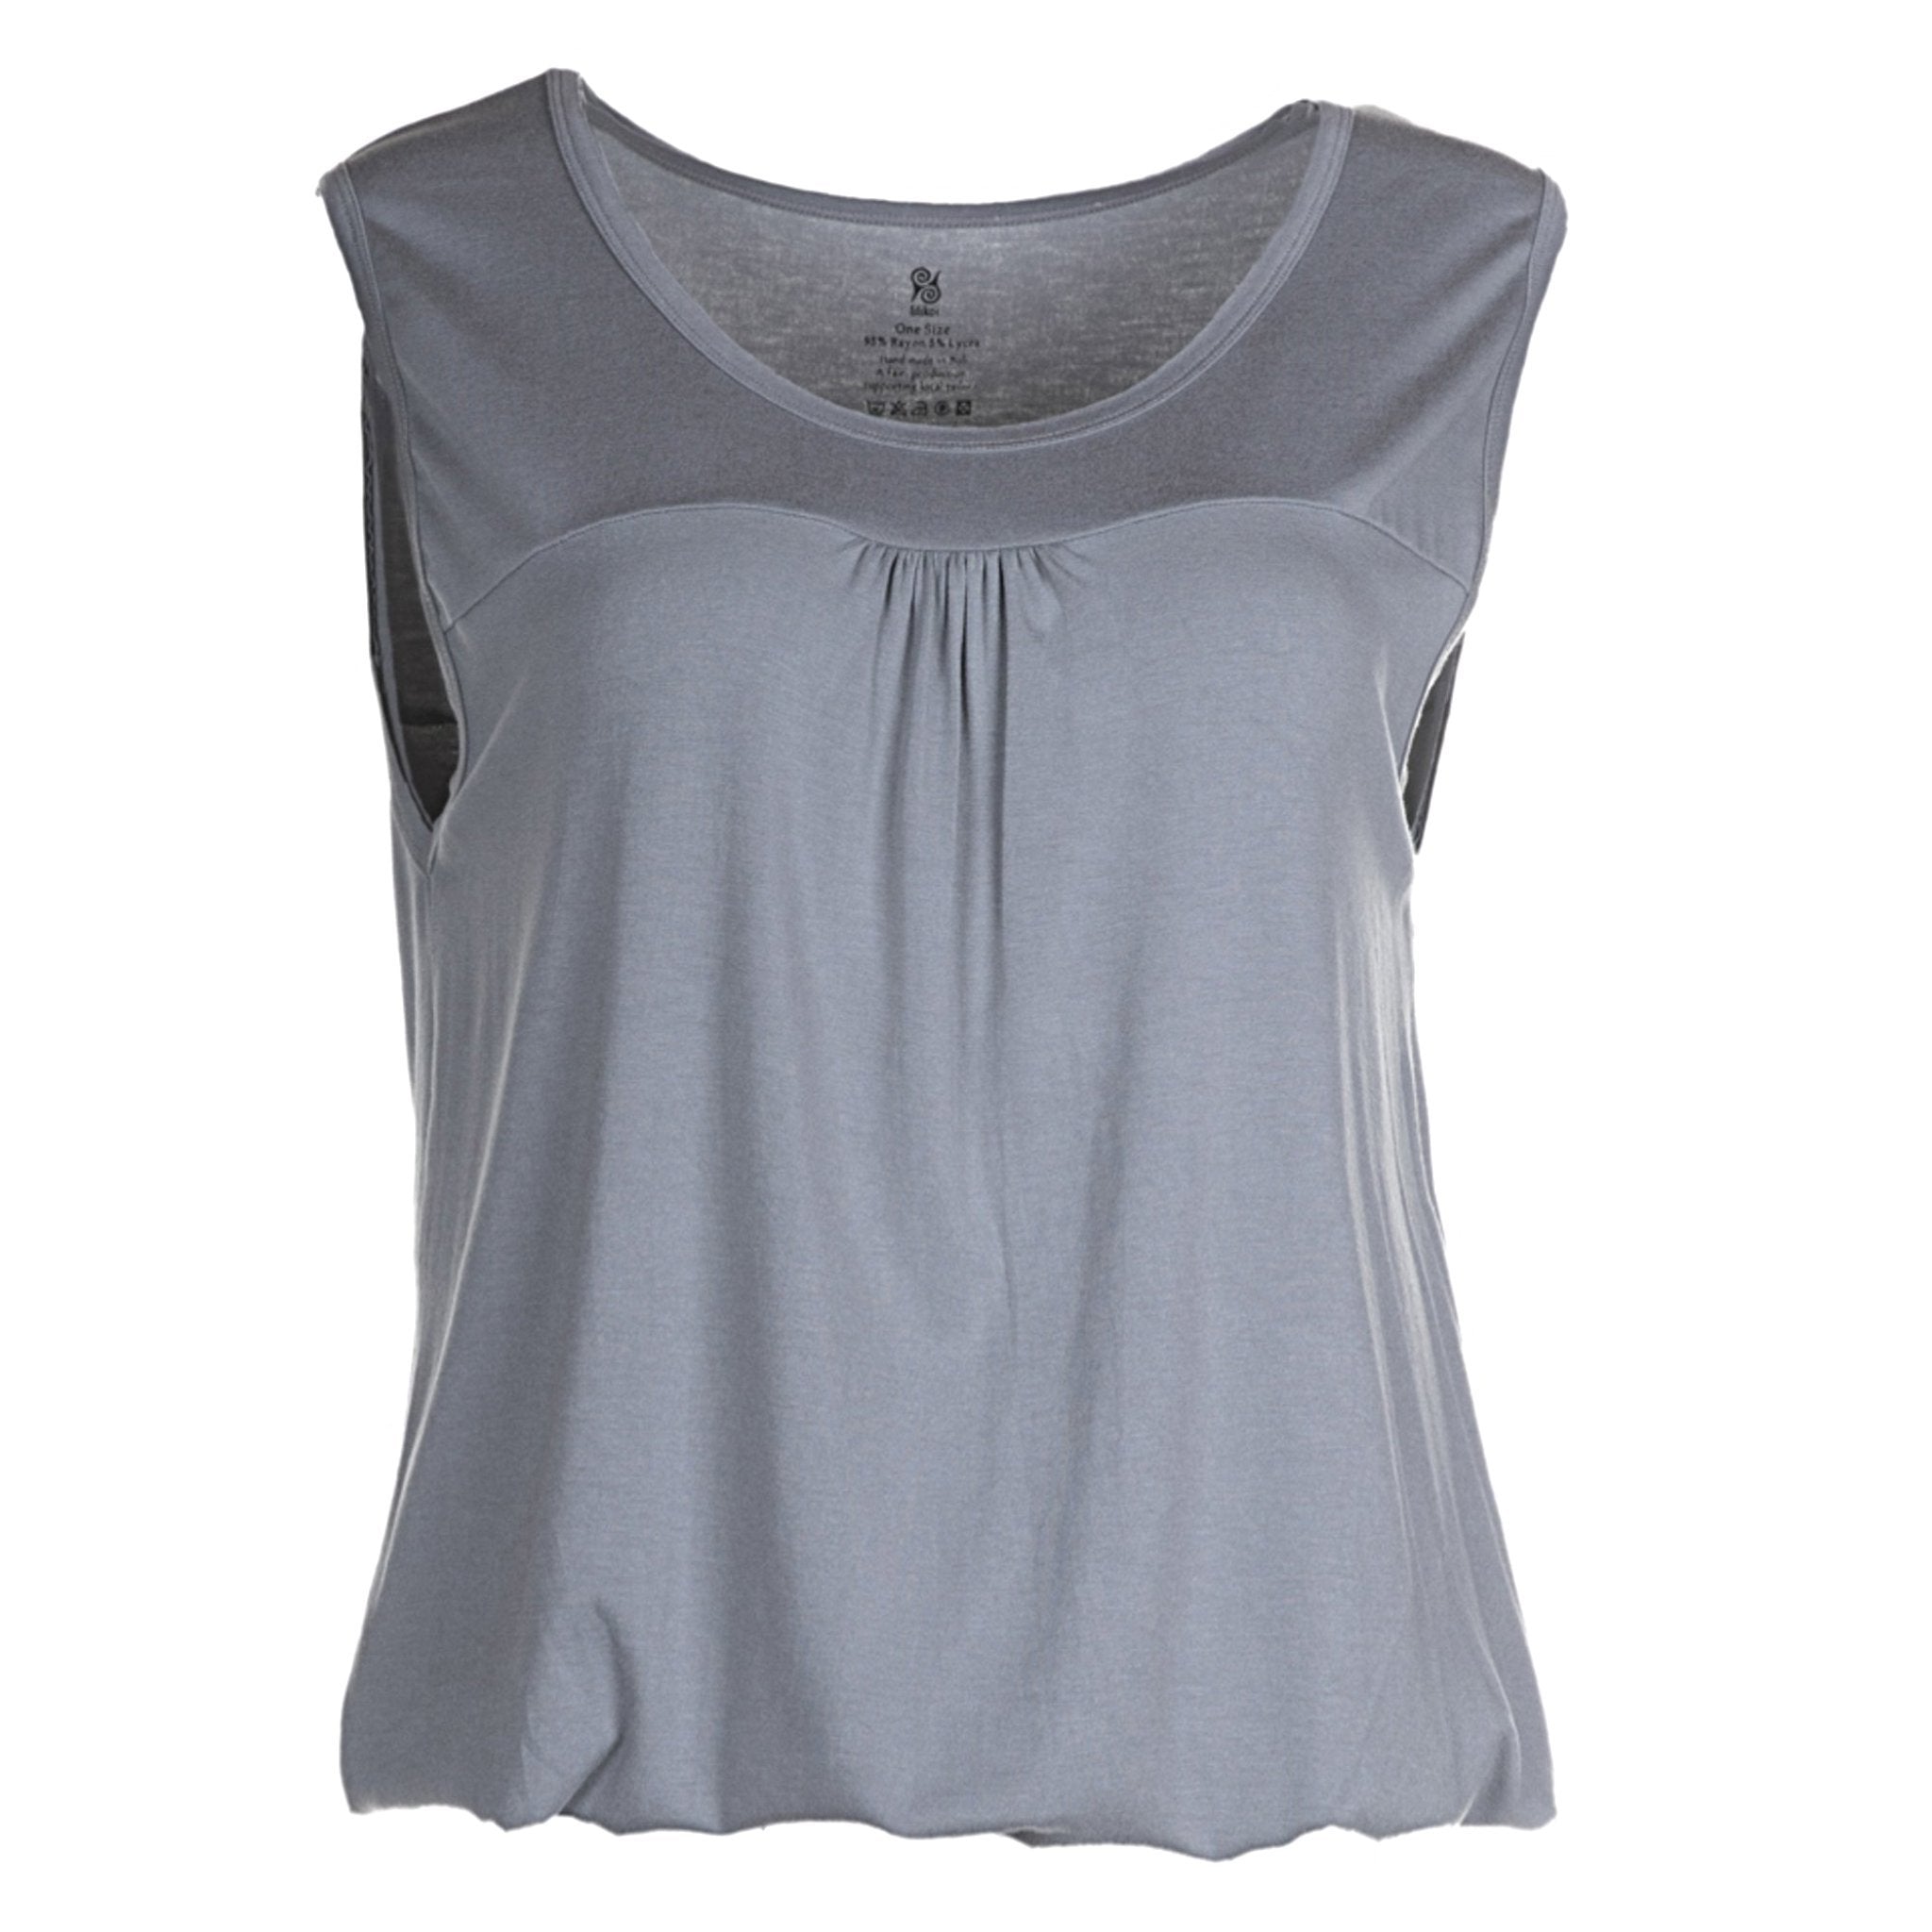 Yoga Shirt Every Day Grey (Size M/L)